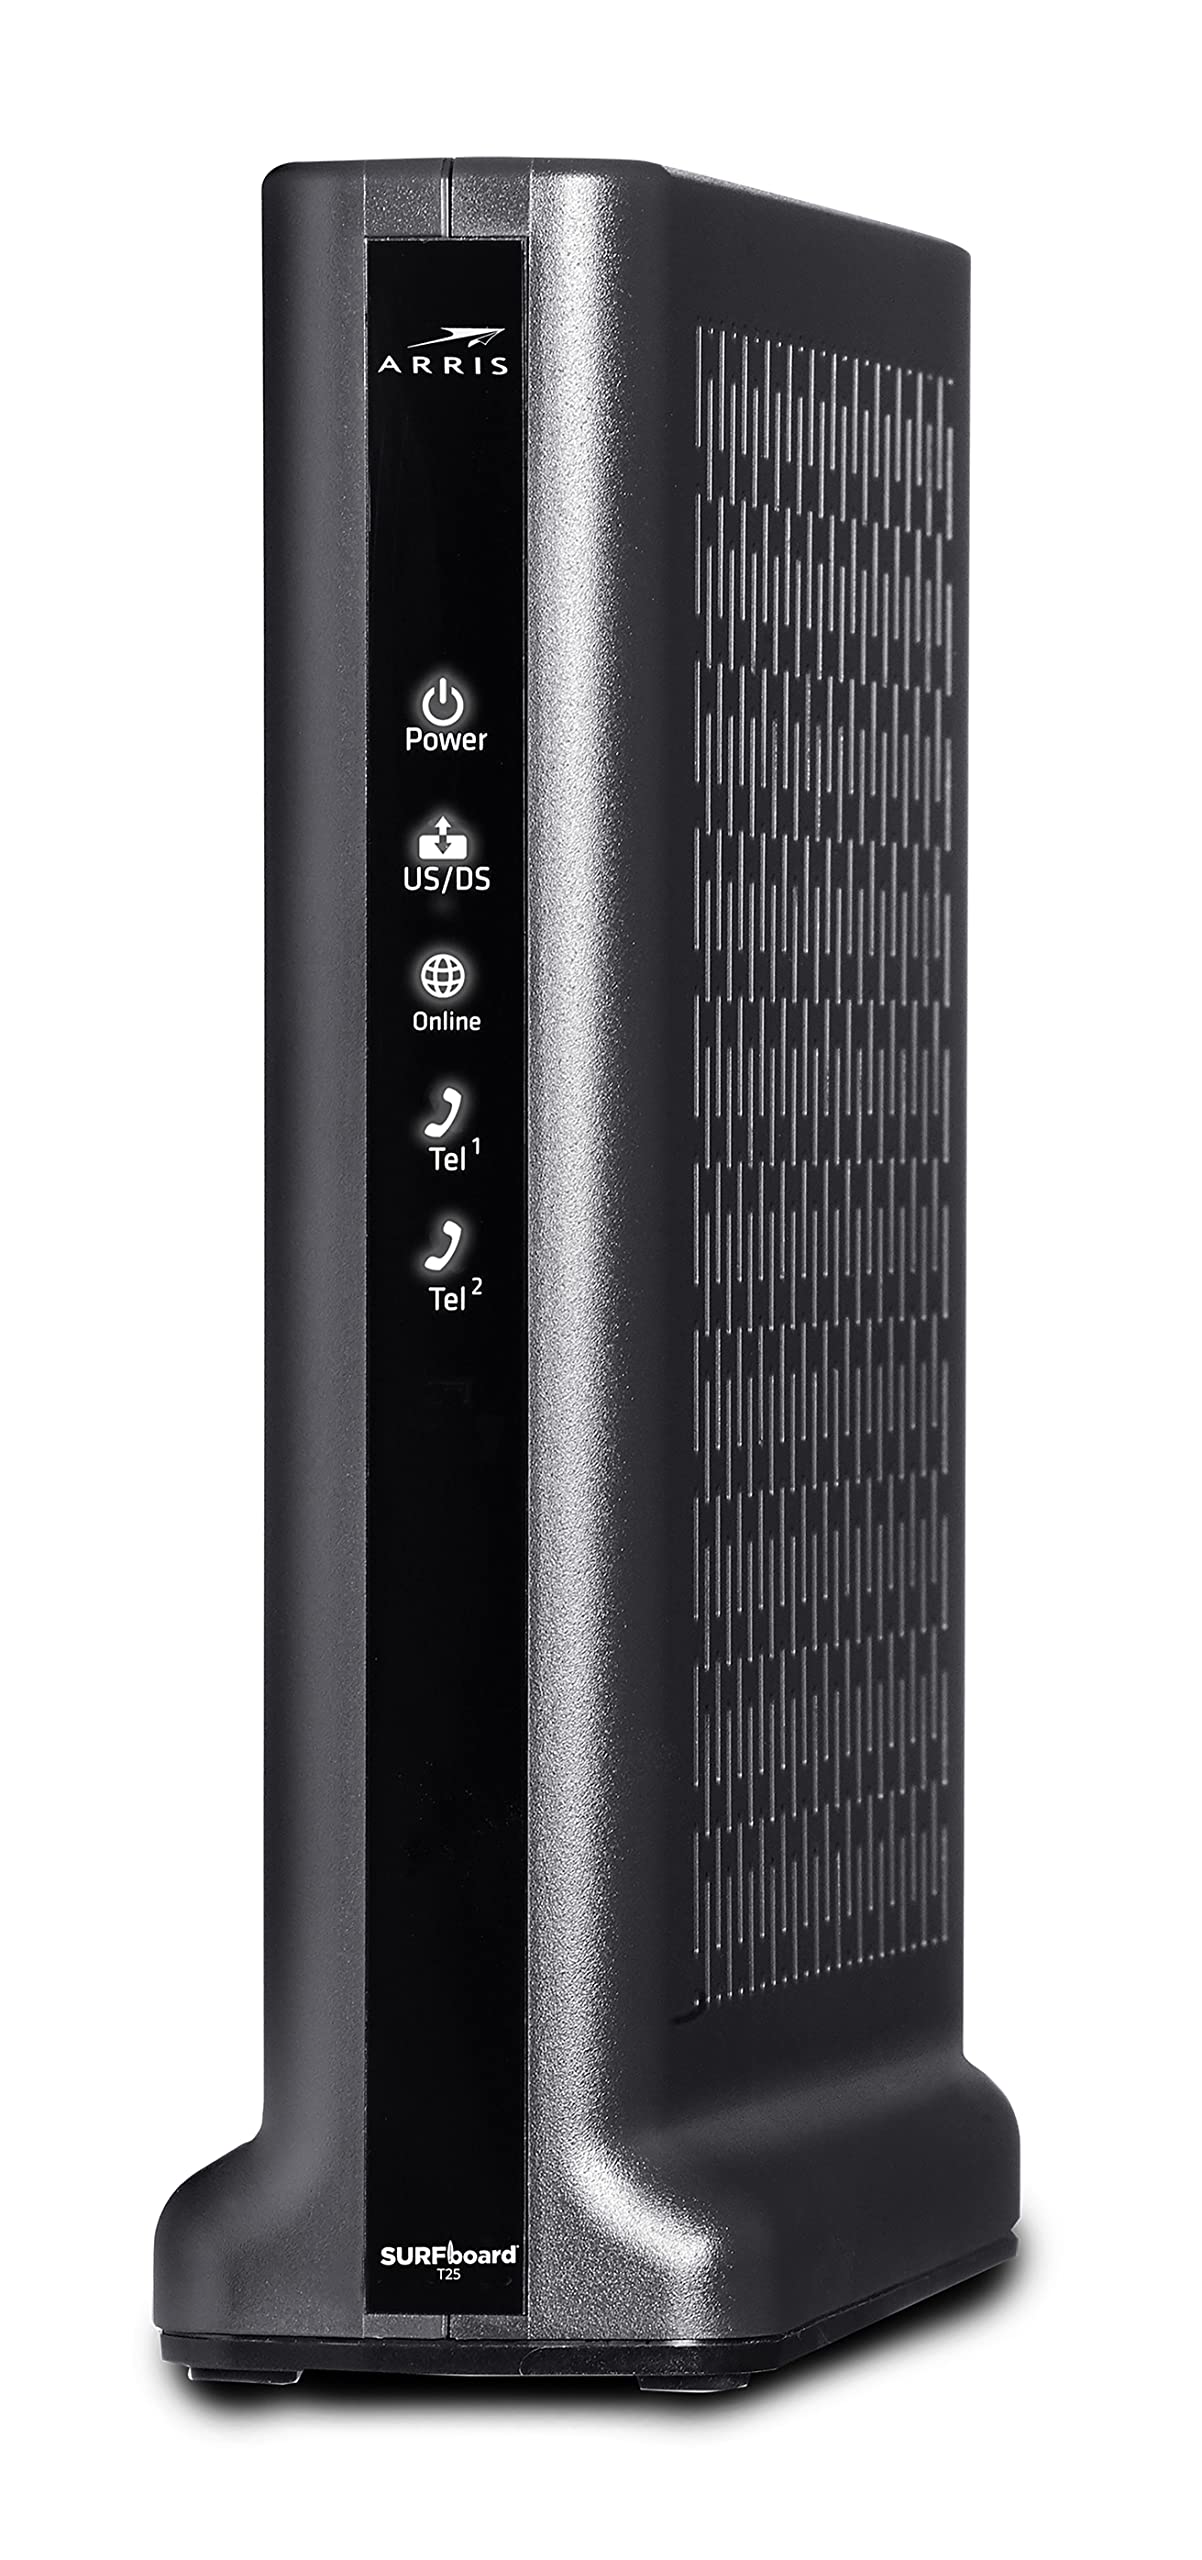 ARRIS Surfboard mAX Pro W133 Tri-Band Mesh Wi-Fi 6 System & T25 DOCSIS 3.1 Gigabit Cable Modem | Comcast Xfinity Internet & Voice | Two 1 Gbps Ports | 2 Telephony Ports